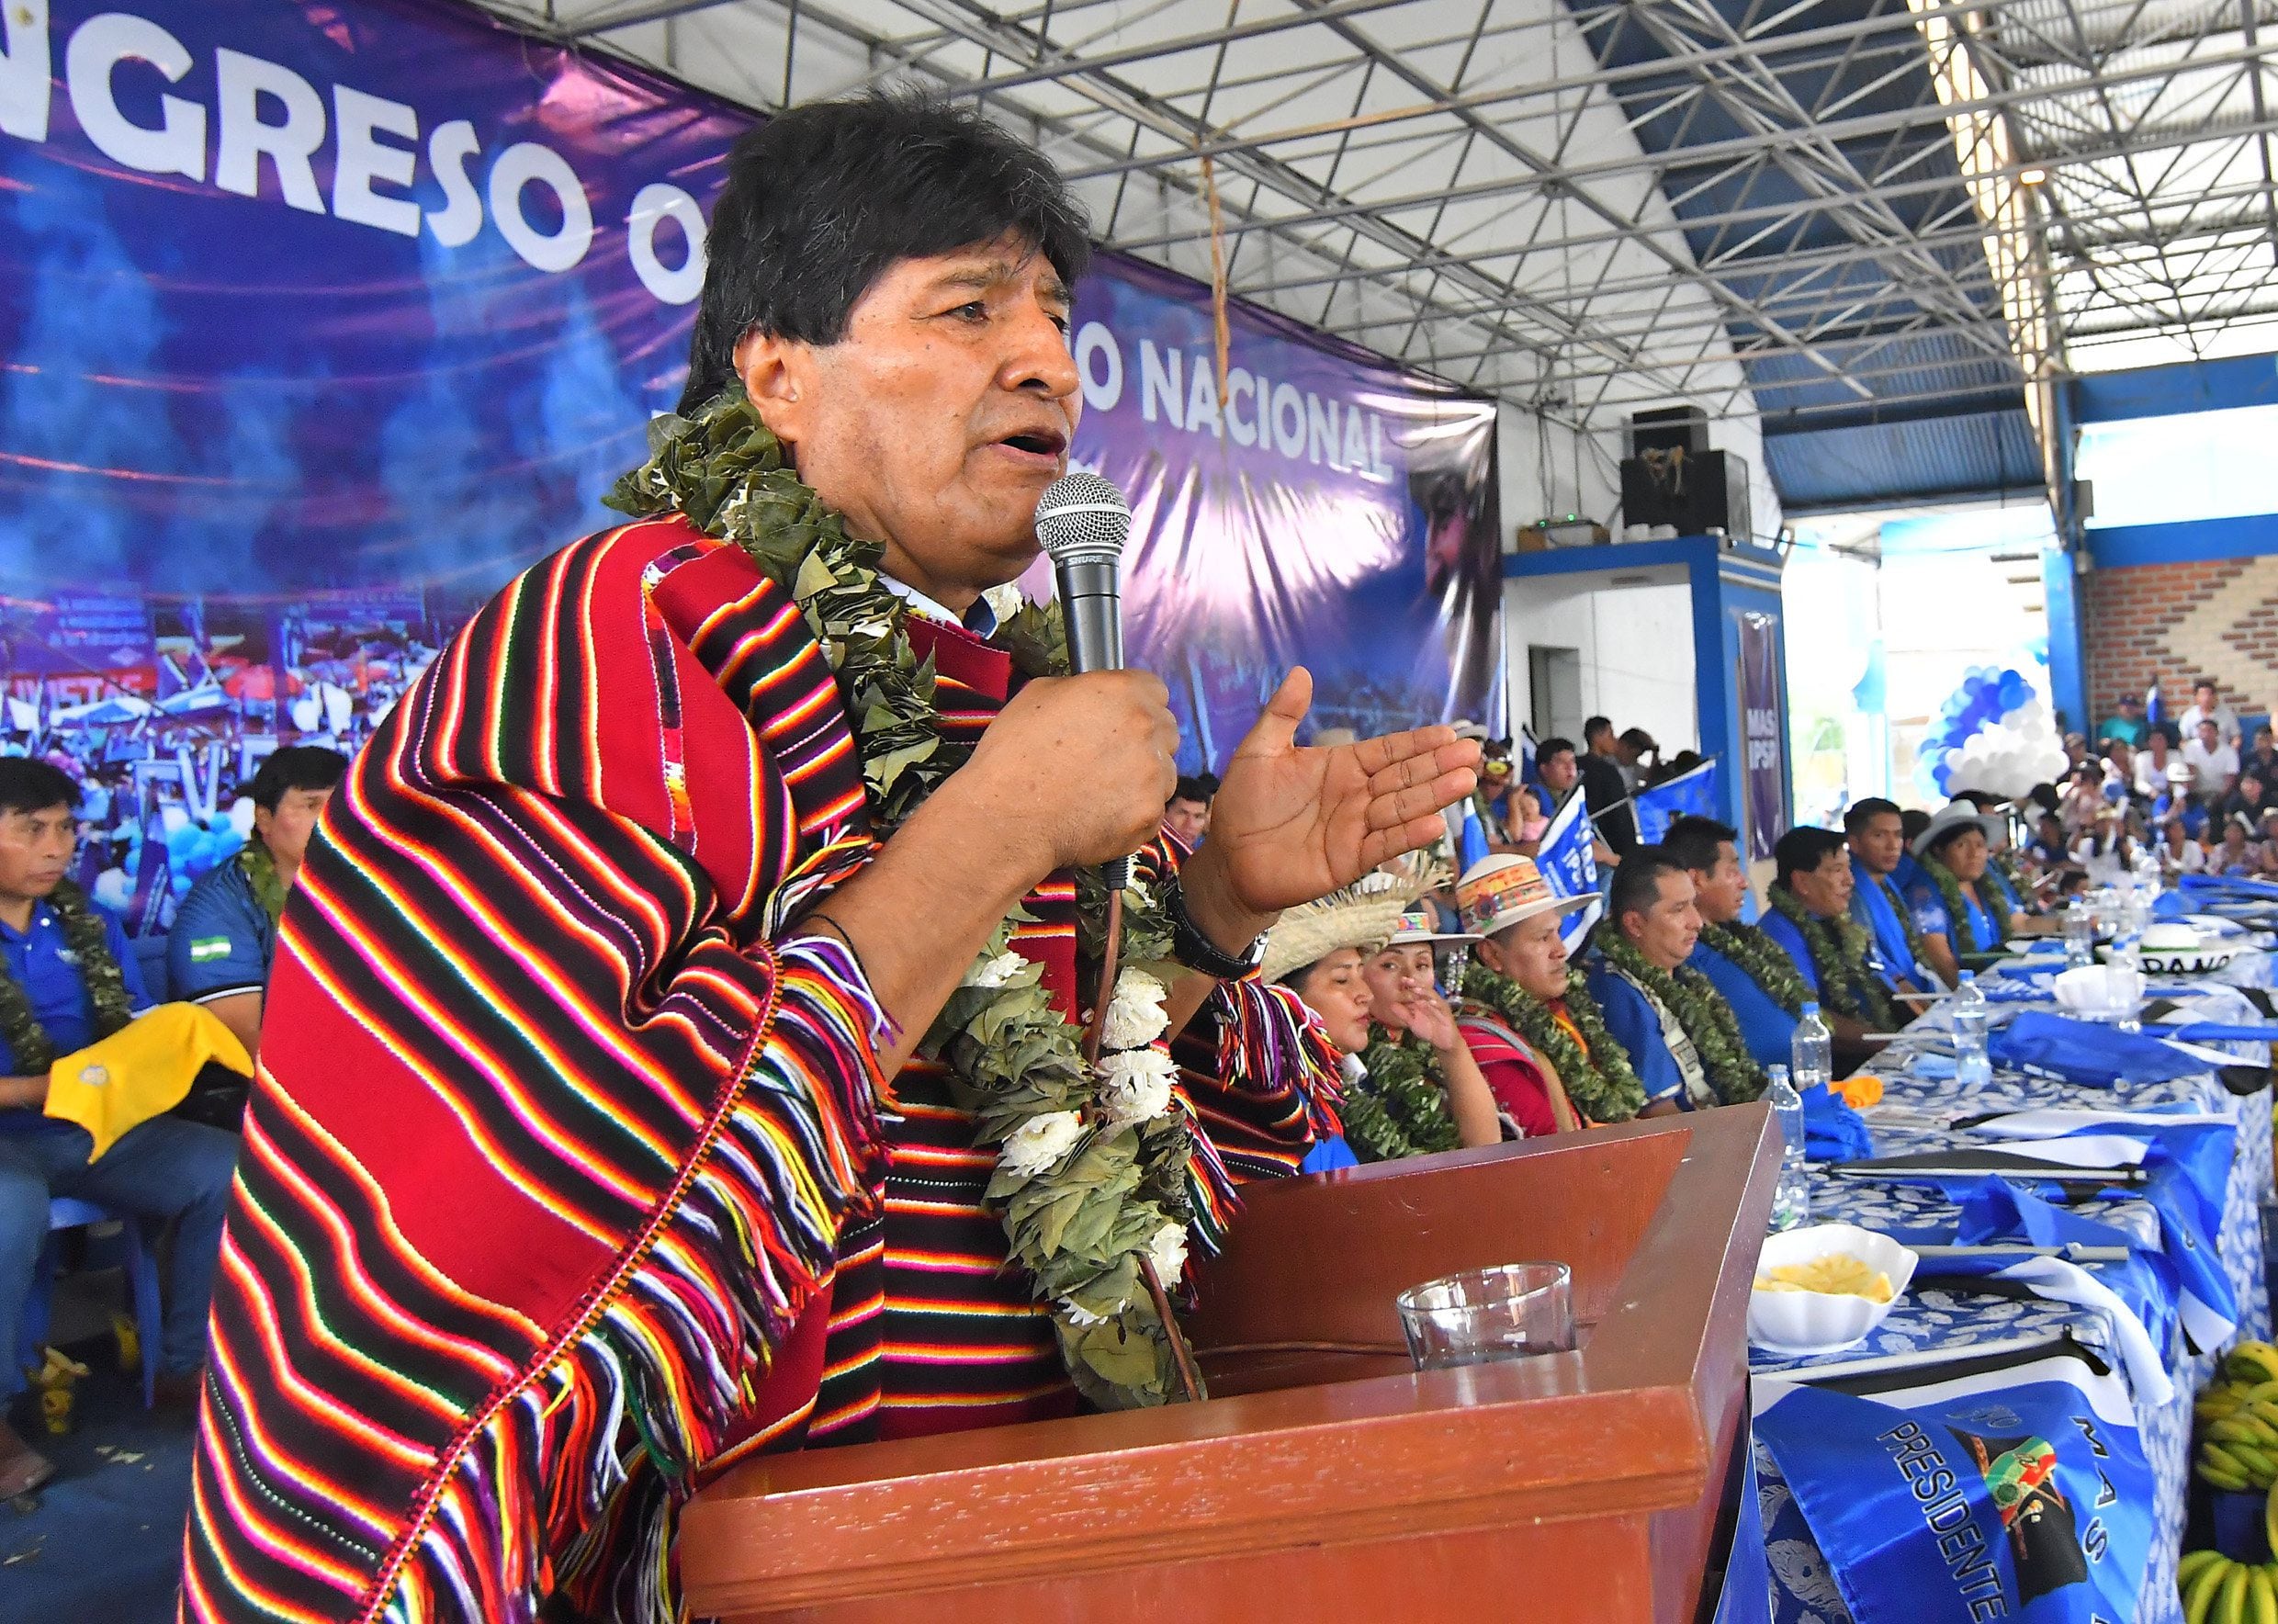 Evo Morales addresses the conference of the Movement Towards Socialism (MAS) in Lauca Ñ on Tuesday (EFE/Jorge Abrego).